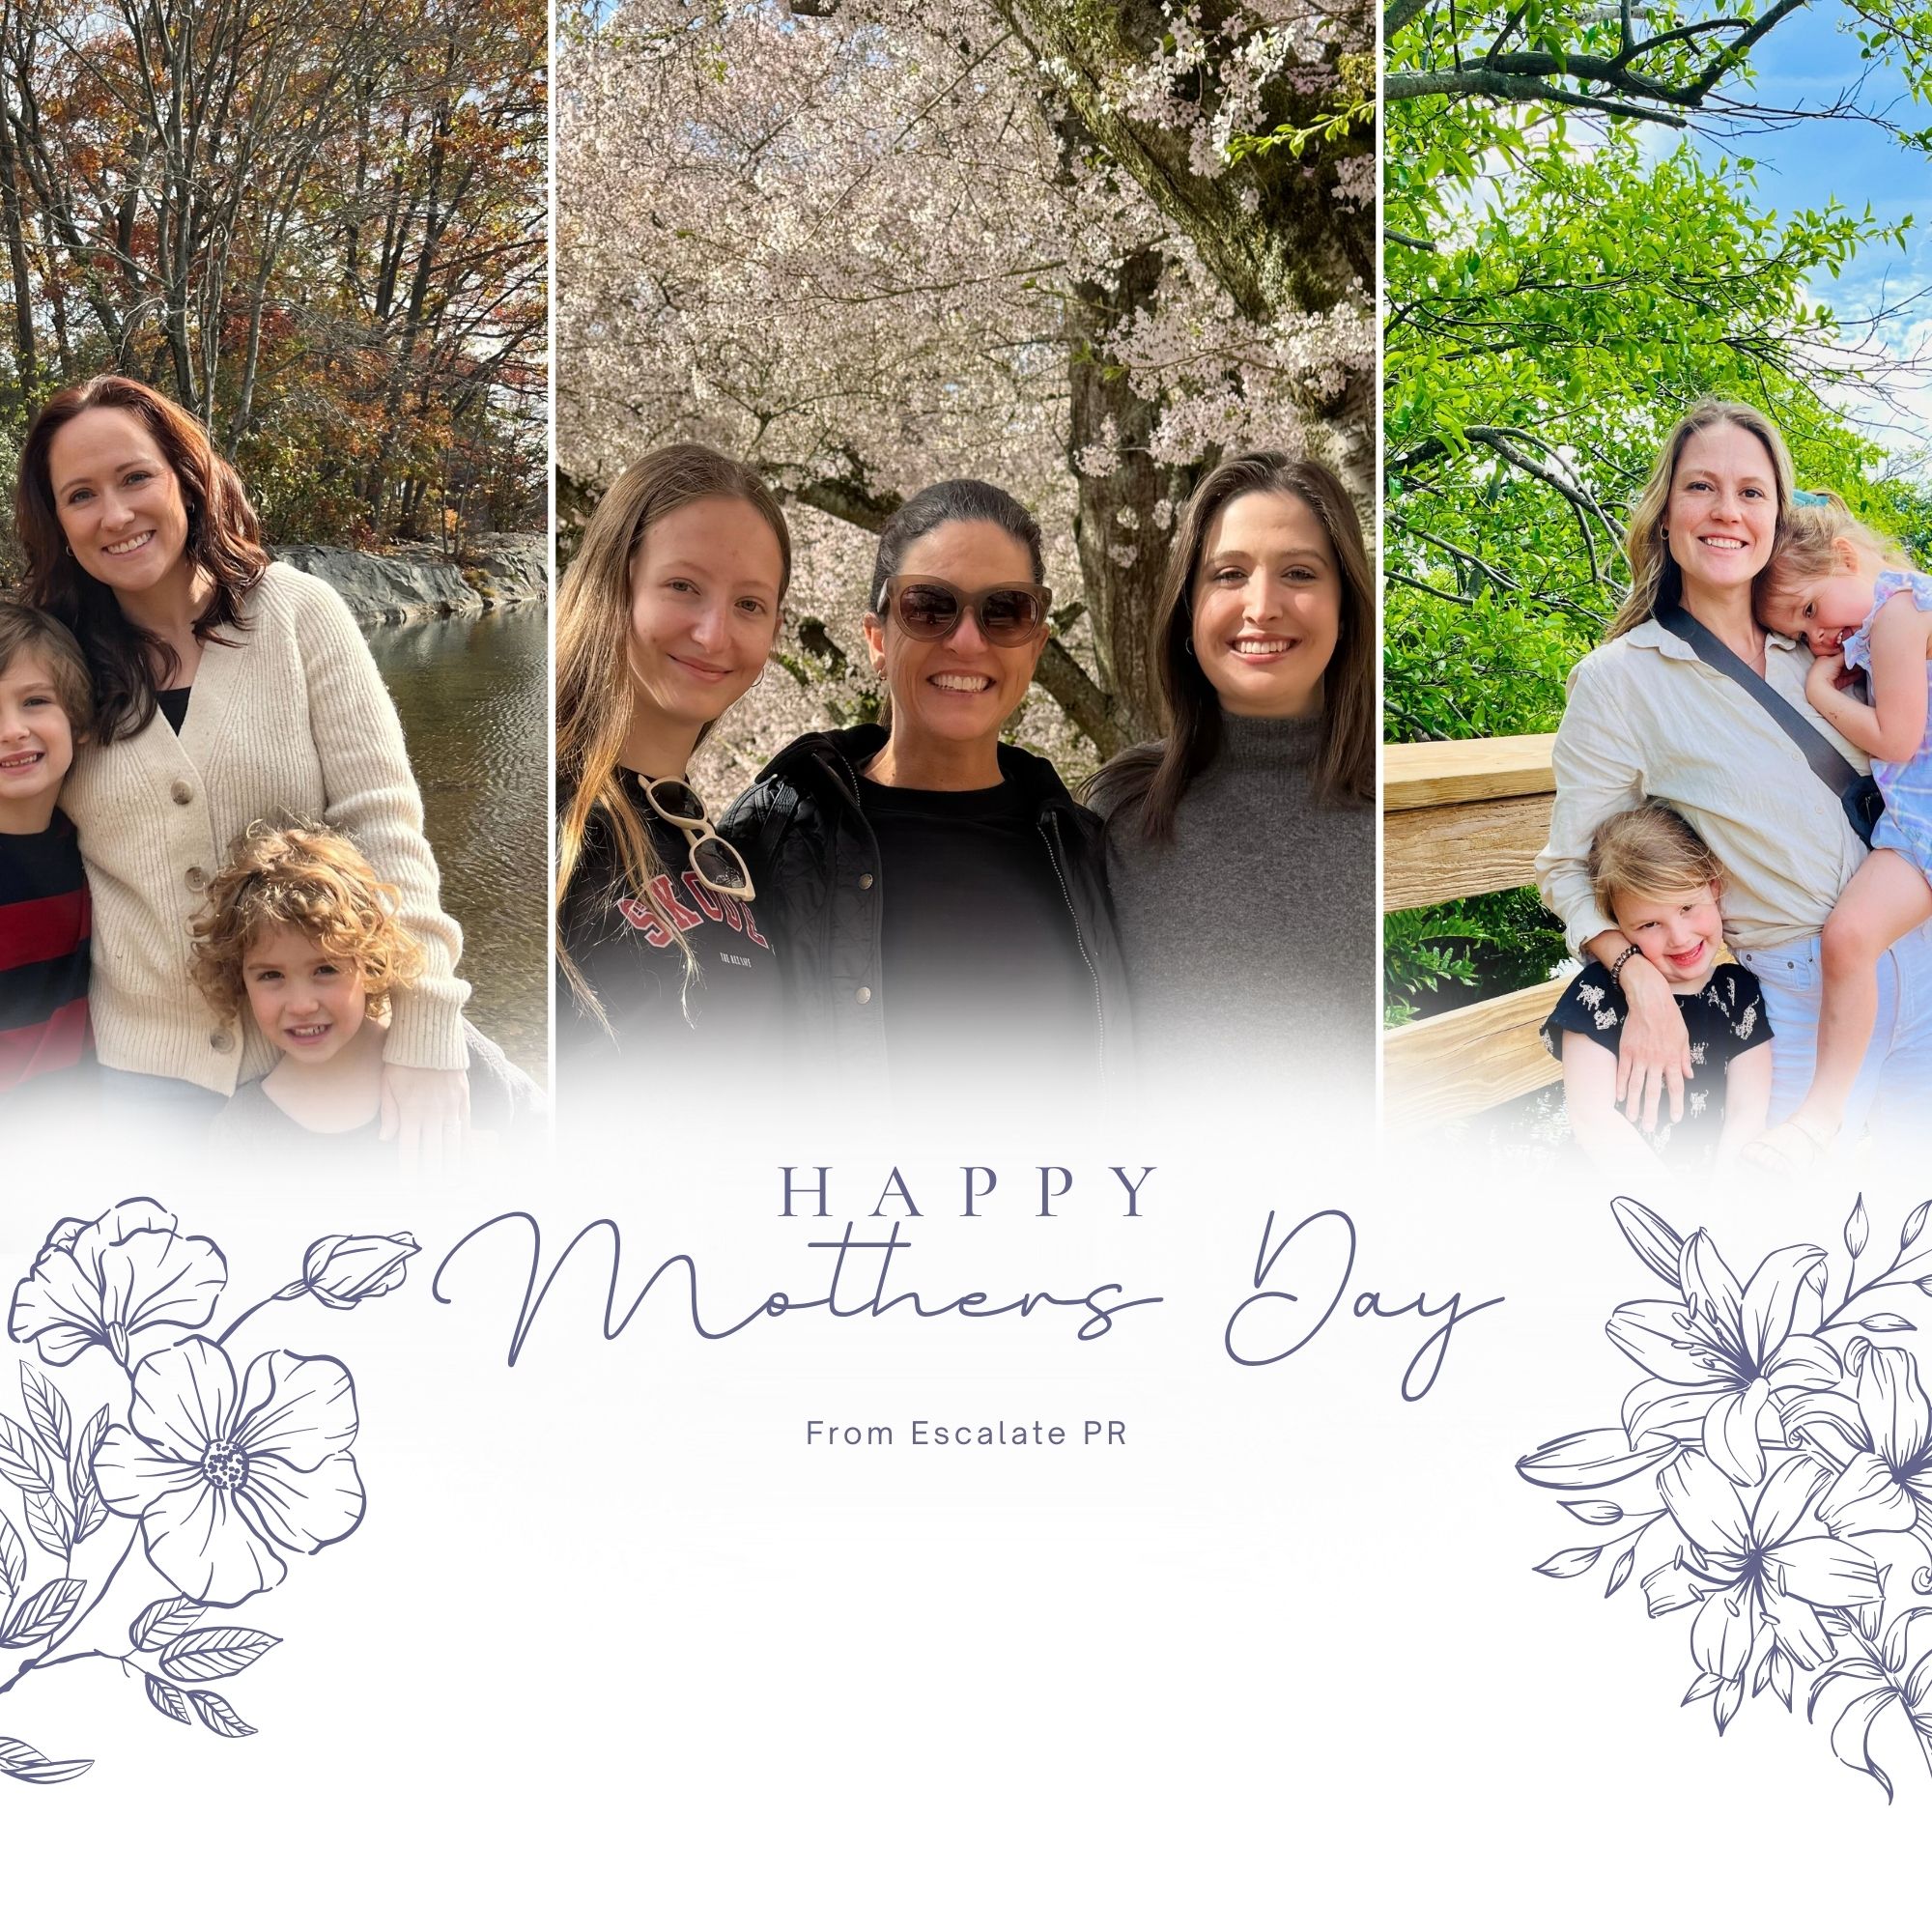 Happy Mothers Day from Escalate PR